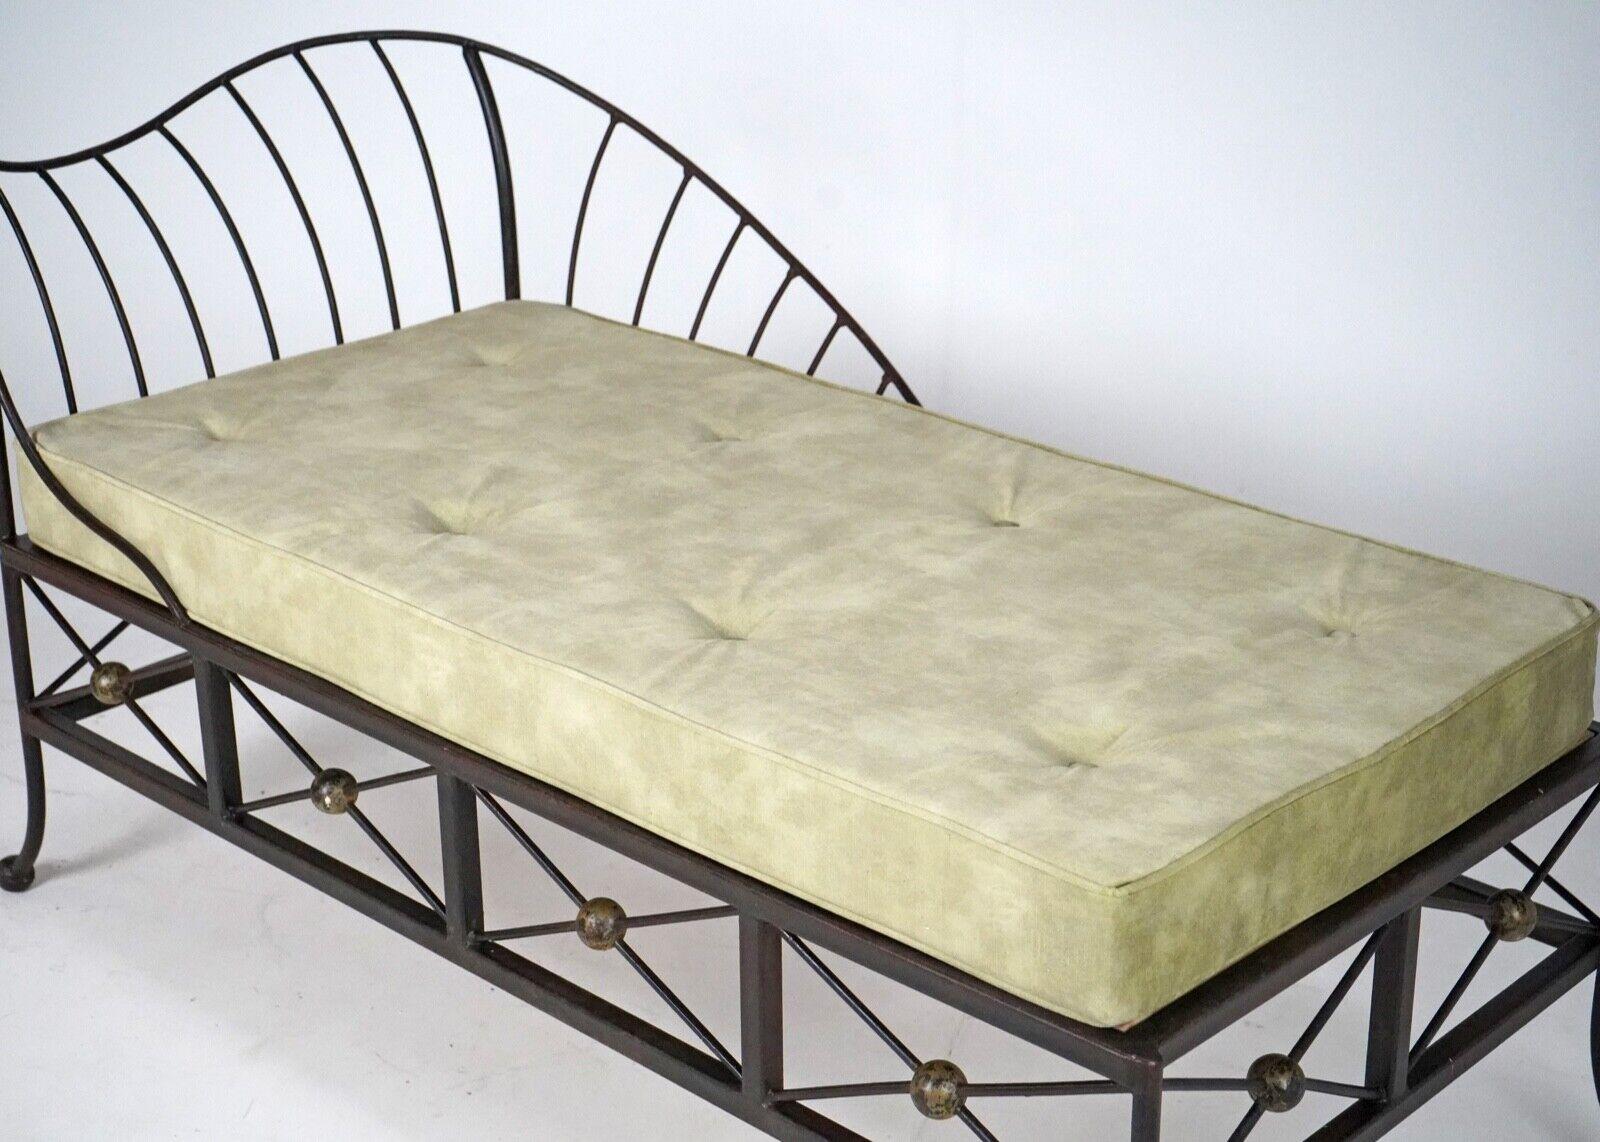 Vintage French Box Steel Metal Day Bed, Sun Lounger, Chaise Lounge Green Seat 8